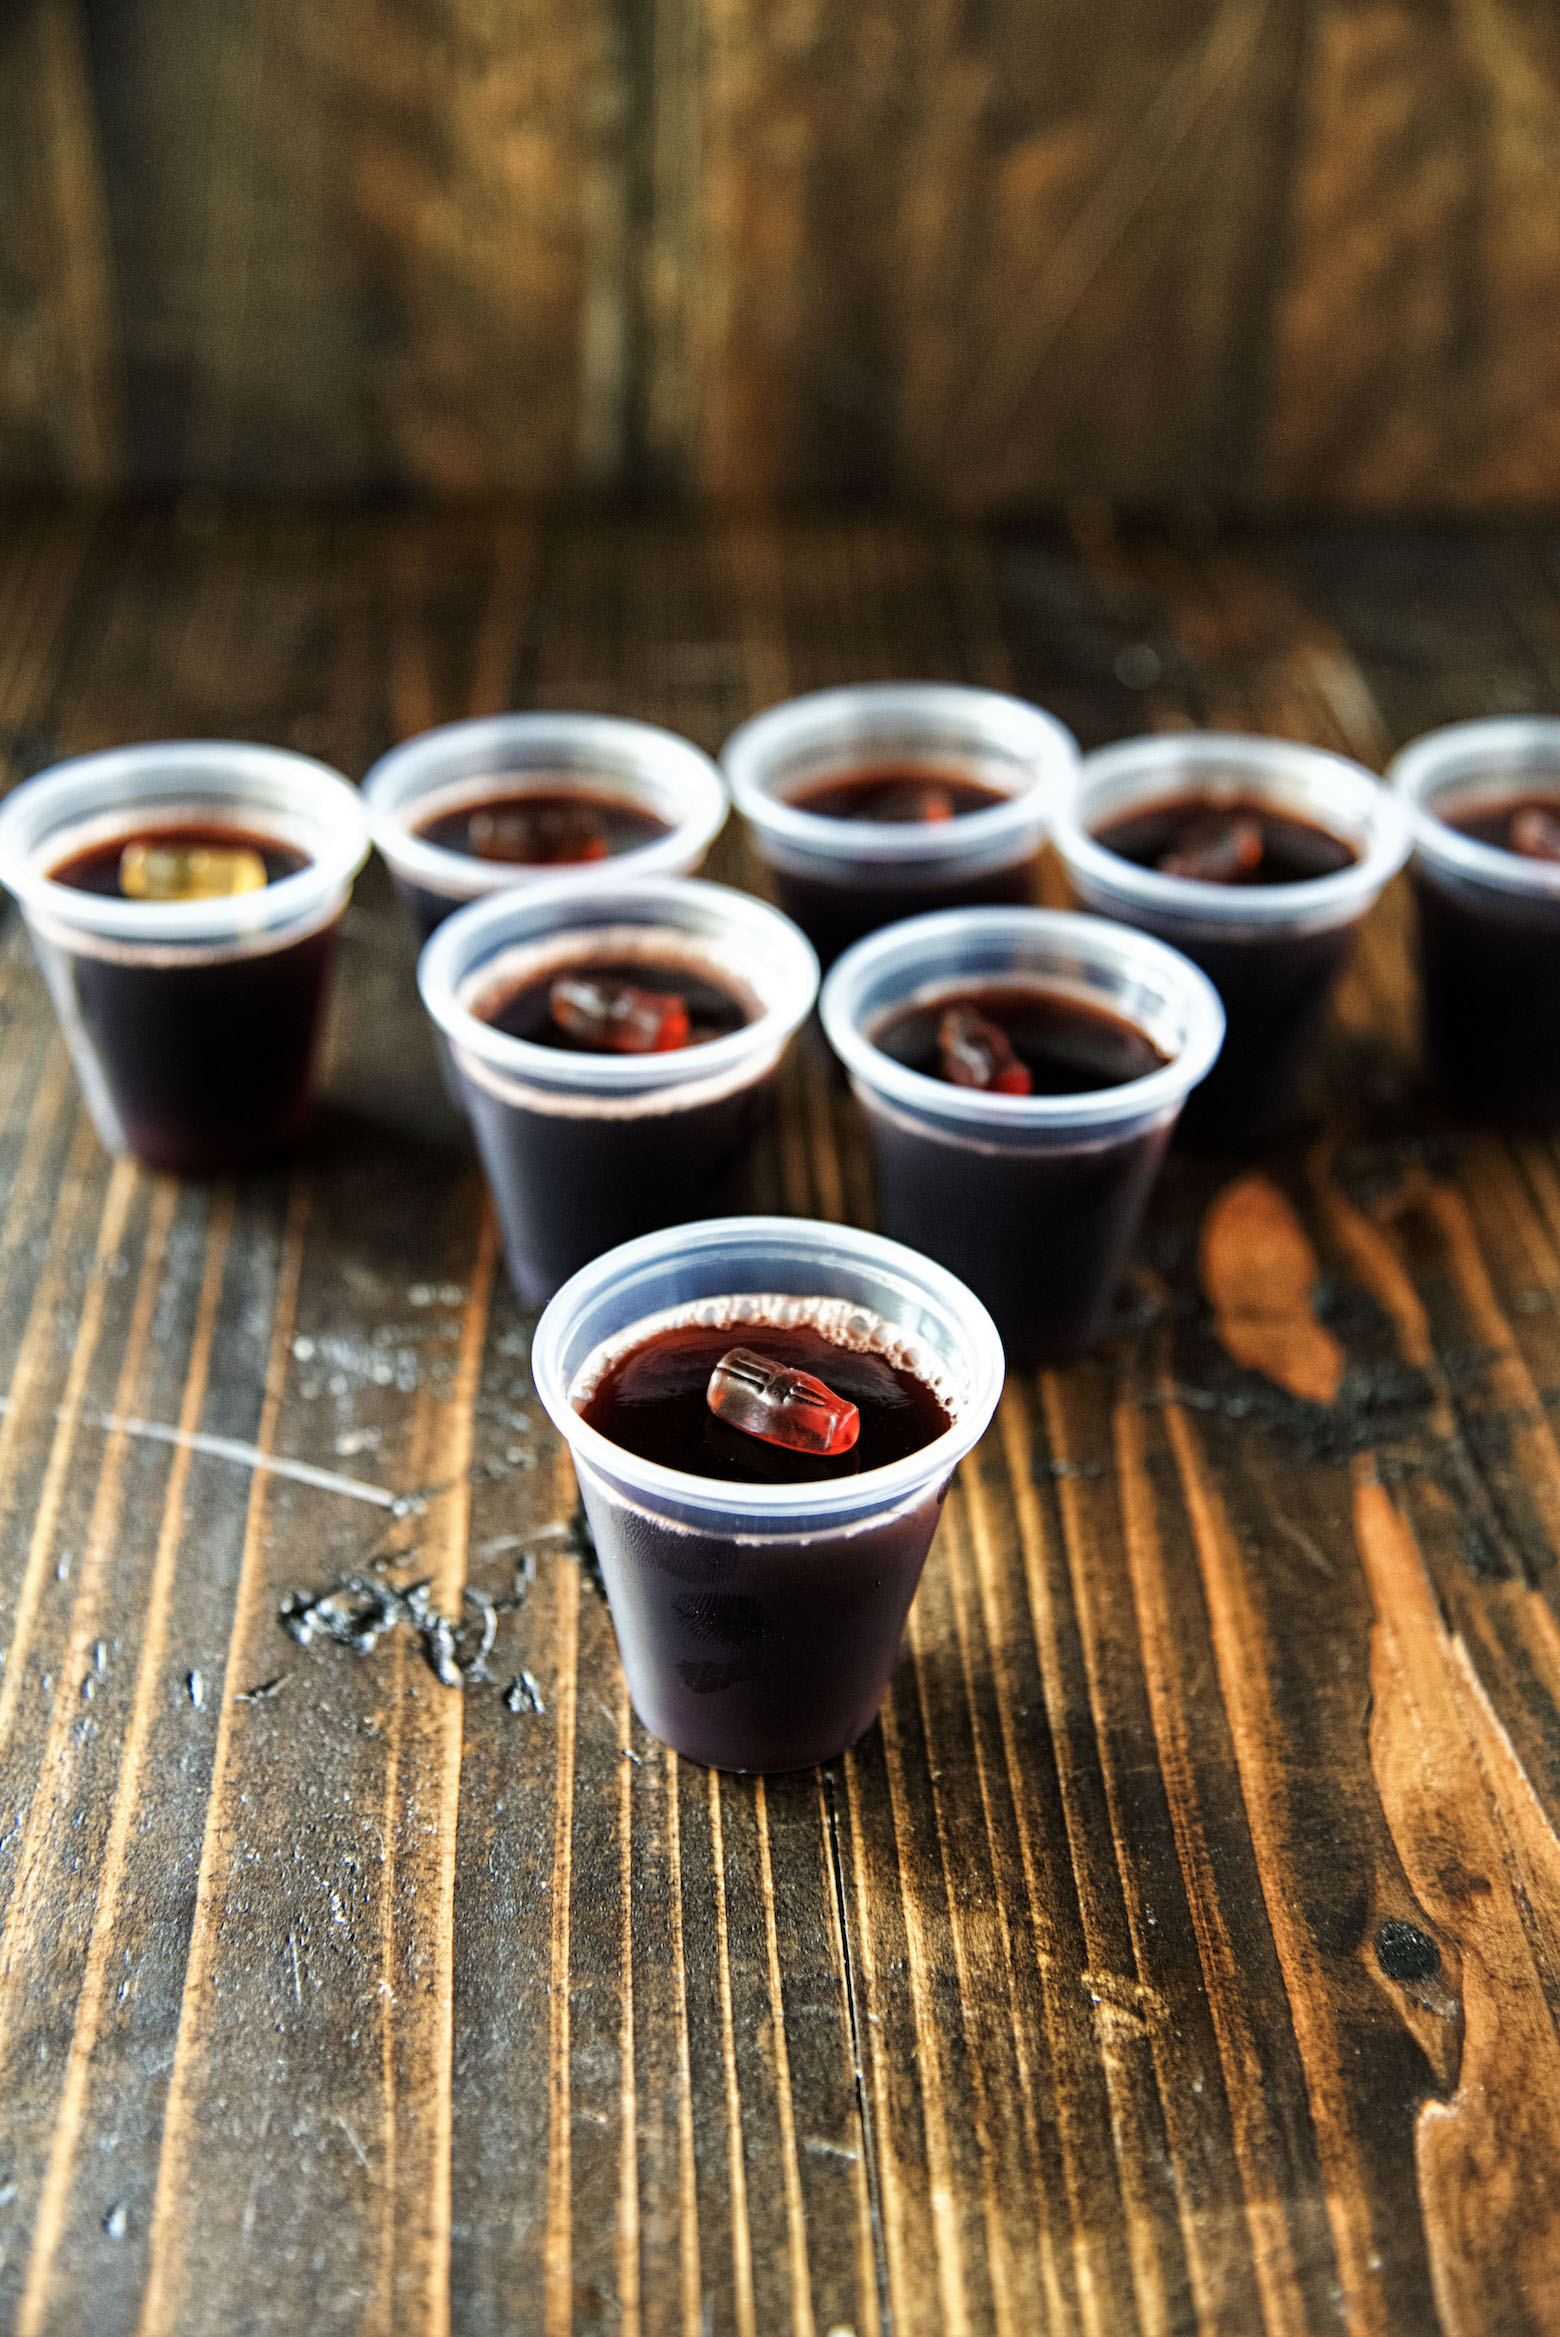 Black Cherry Spiced Rum and Coke Jell-O Shot in pyramid shape with one shot up front. 